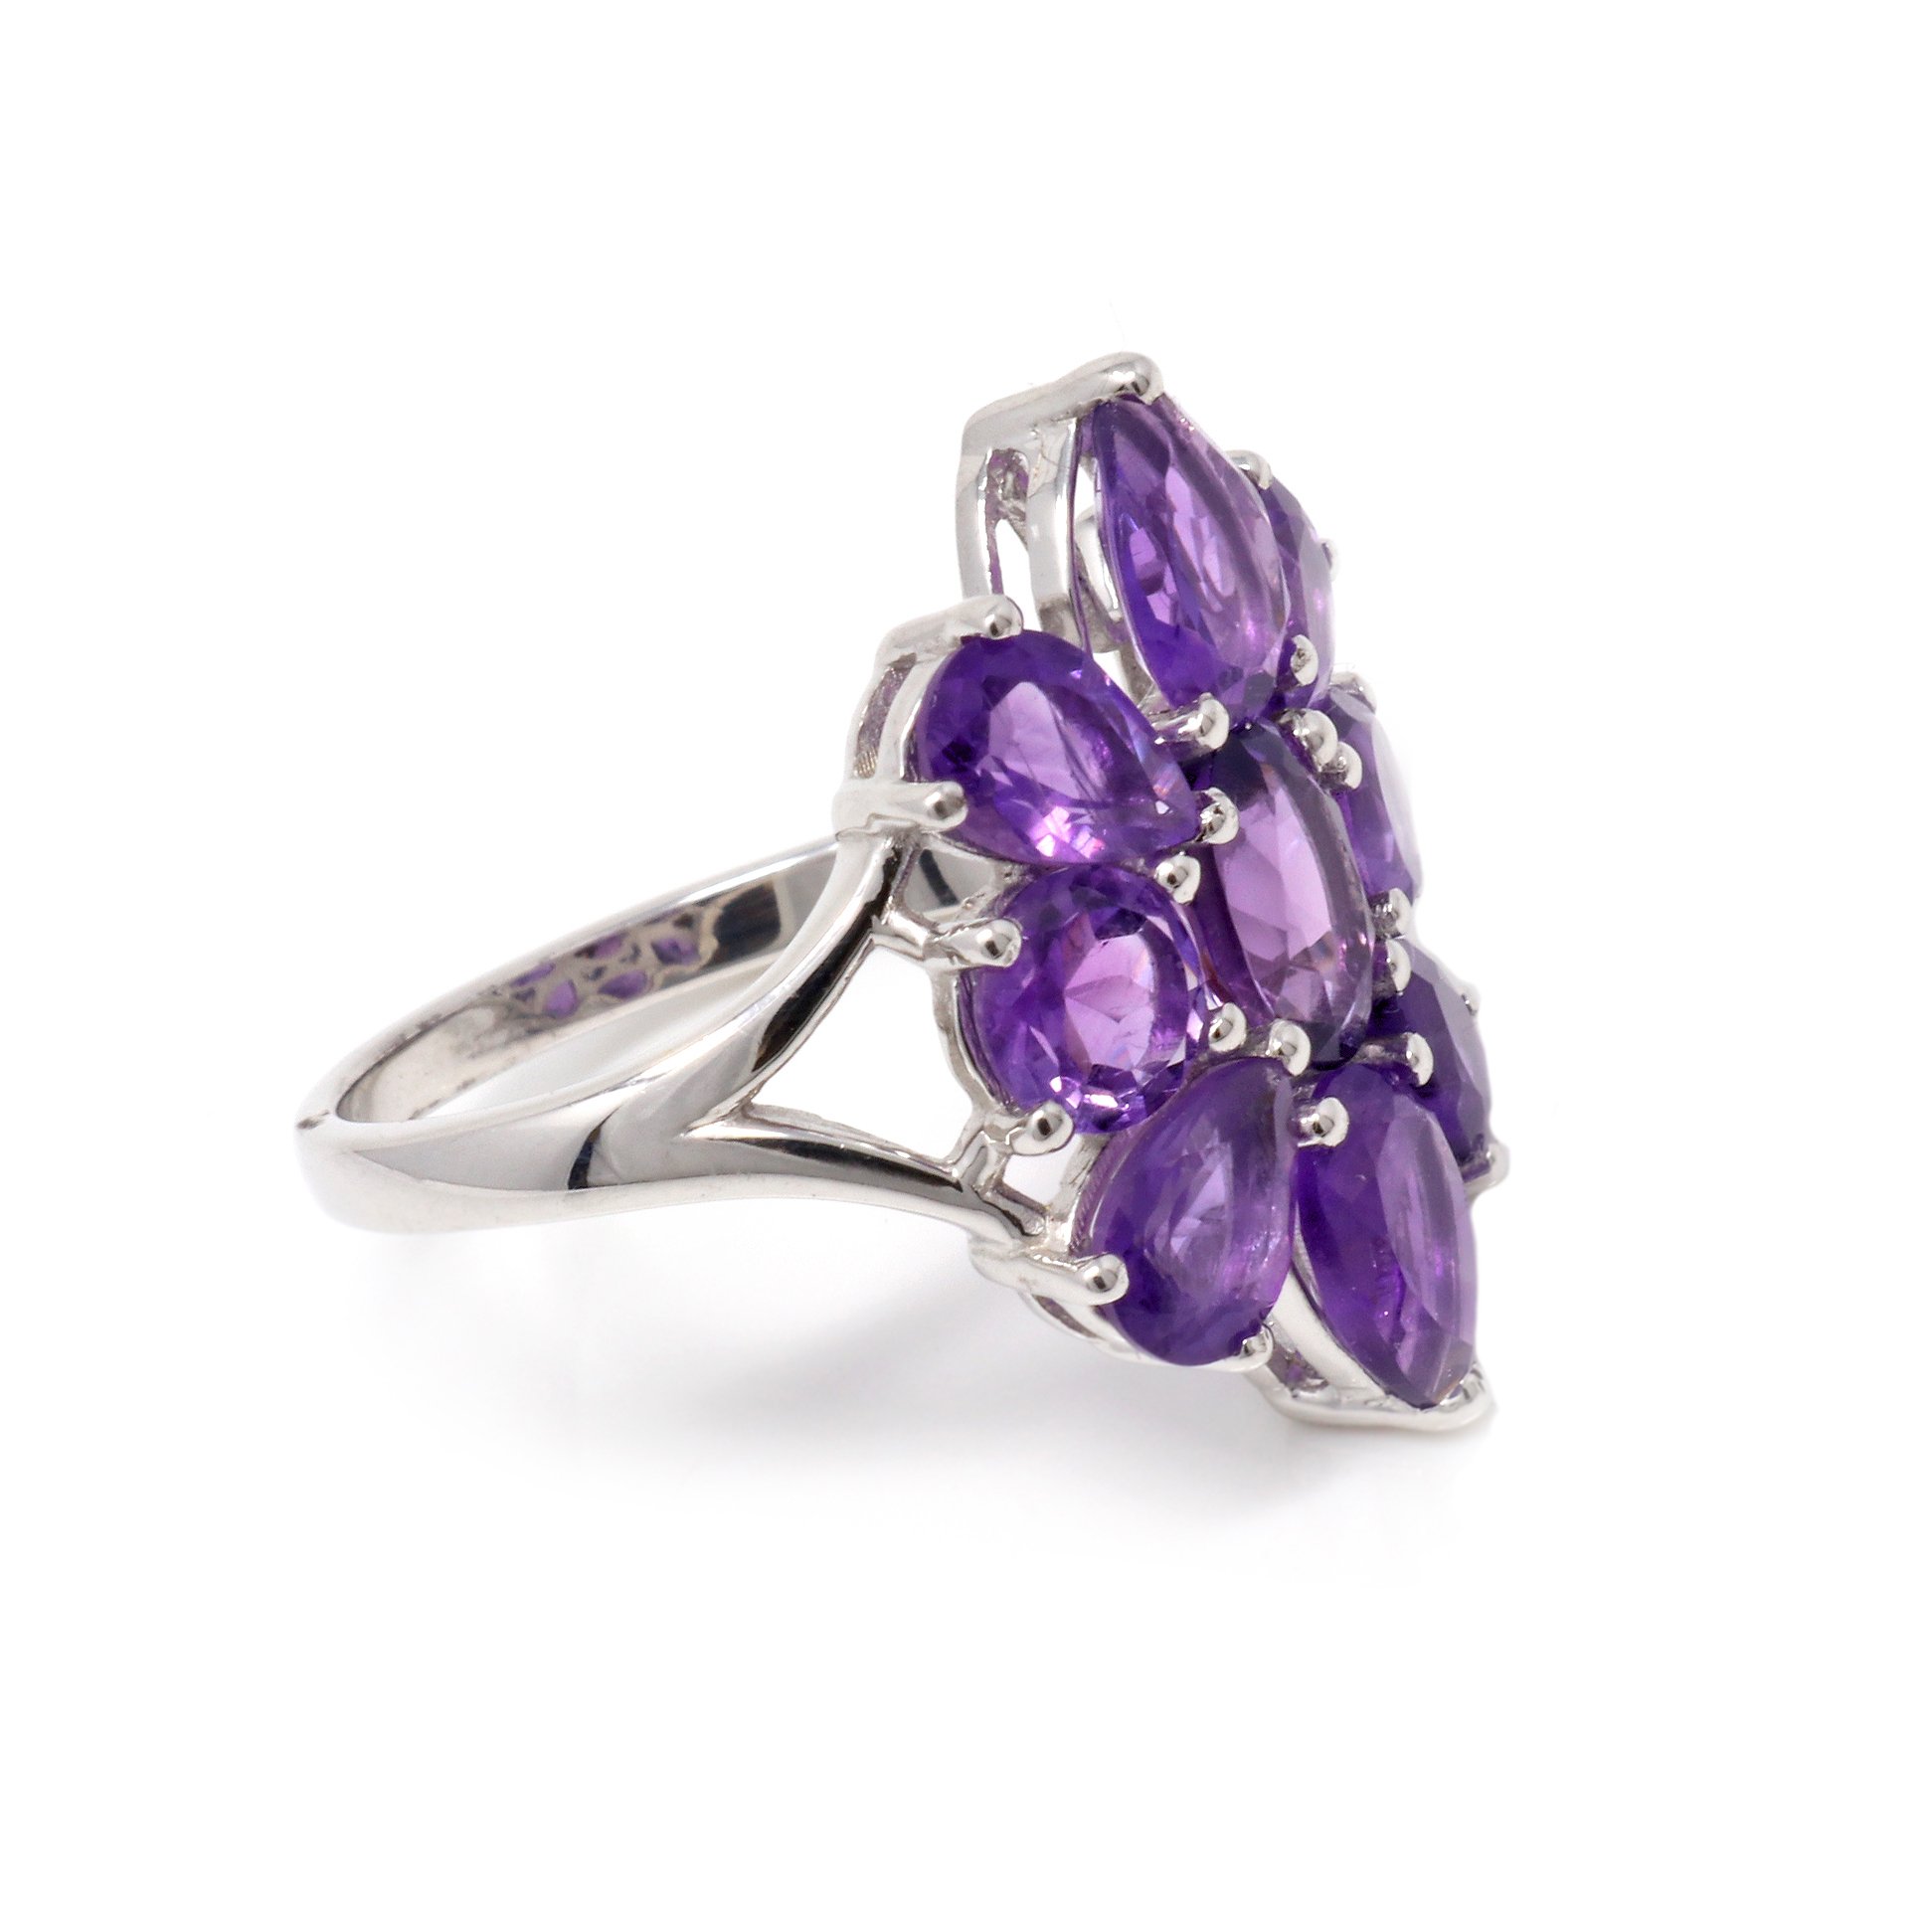 Amethyst Ring Size 10 - with 9 Faceted Stones In Shape Of Dahlia Flower Set On Silver Band With Cutout Top - Prong Set